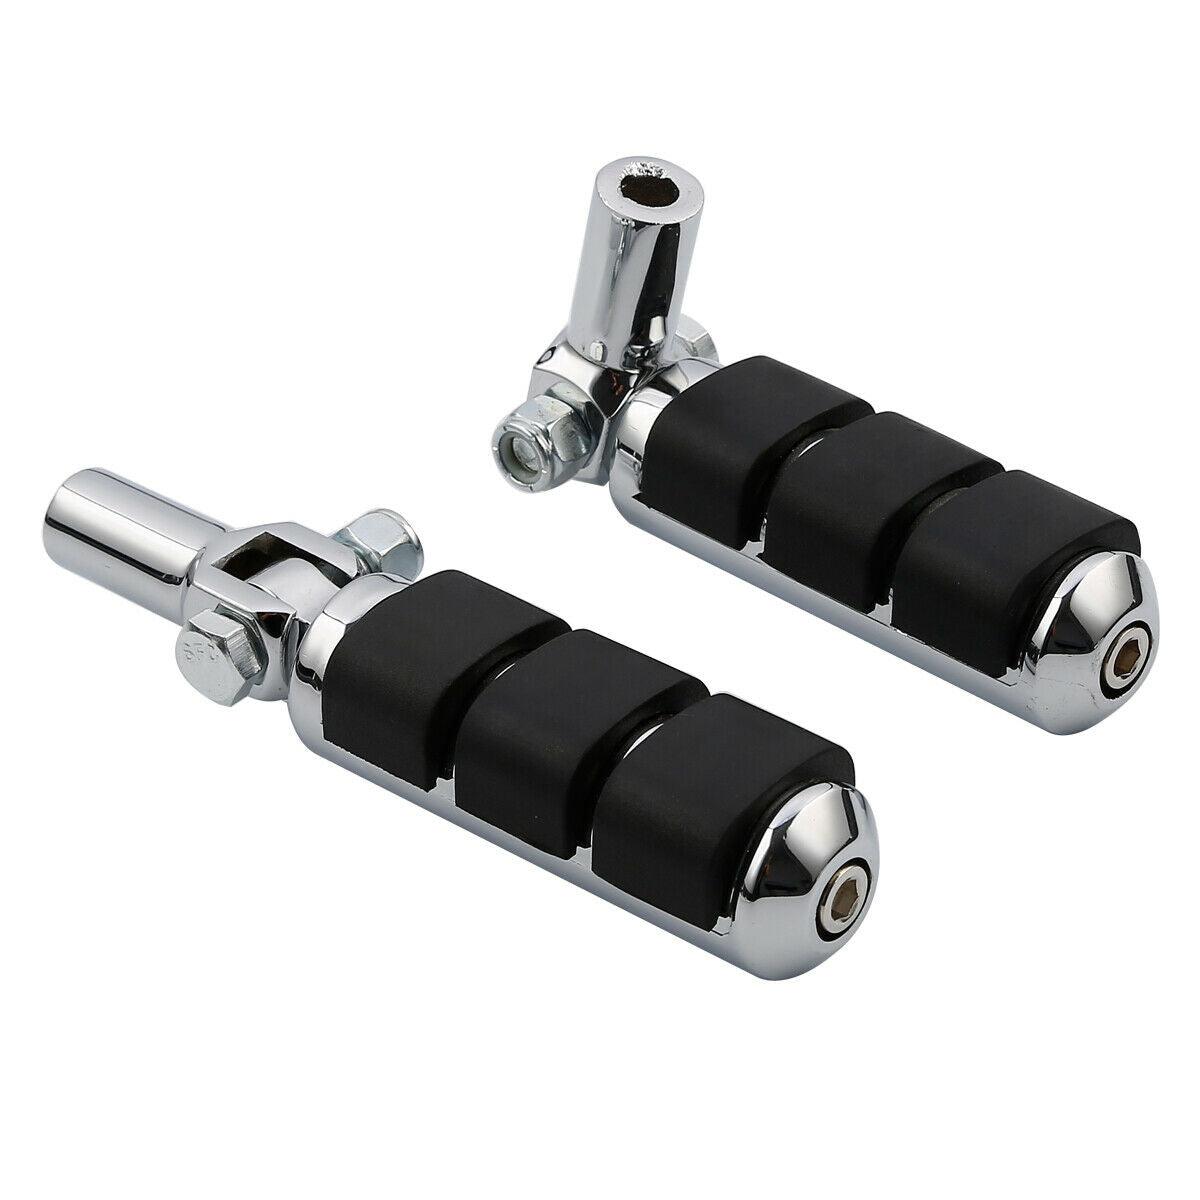 Passenger Footpeg Pegs Mount Fit For Harley Softail Heritage Fatboy 2000-2006 05 - Moto Life Products